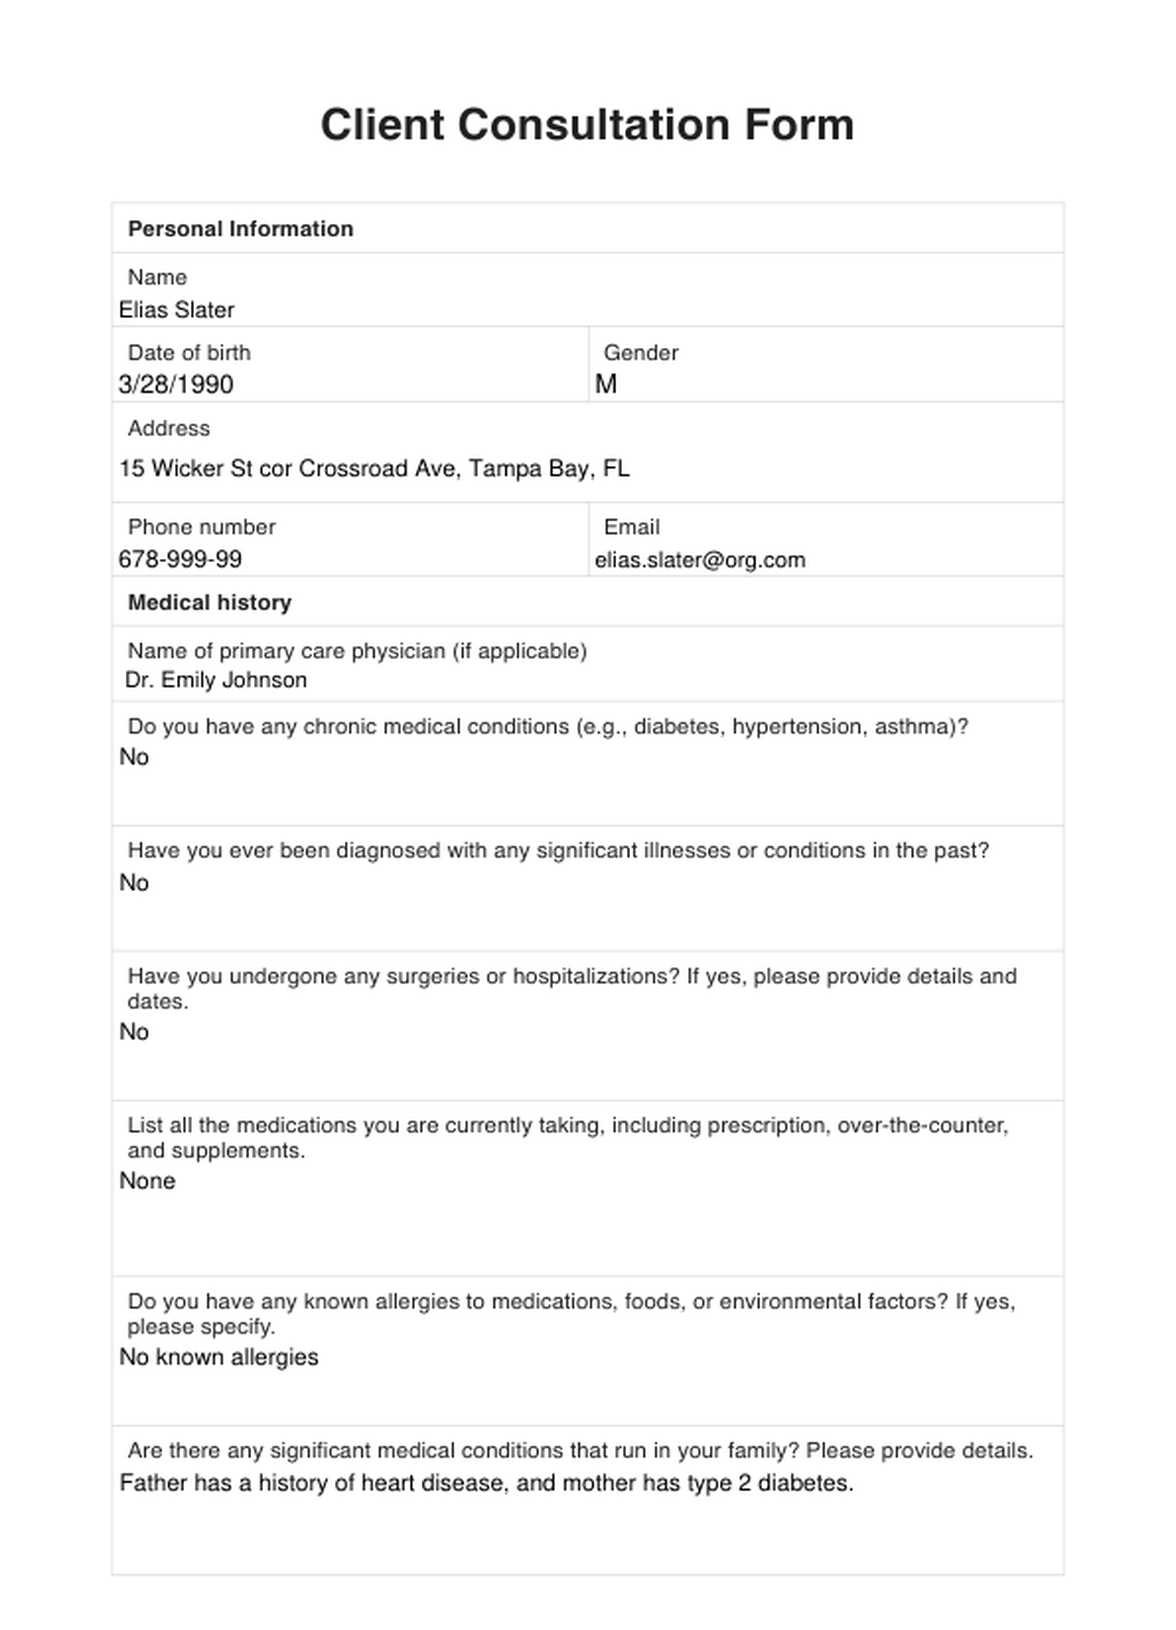 Client Consultation Forms PDF Example